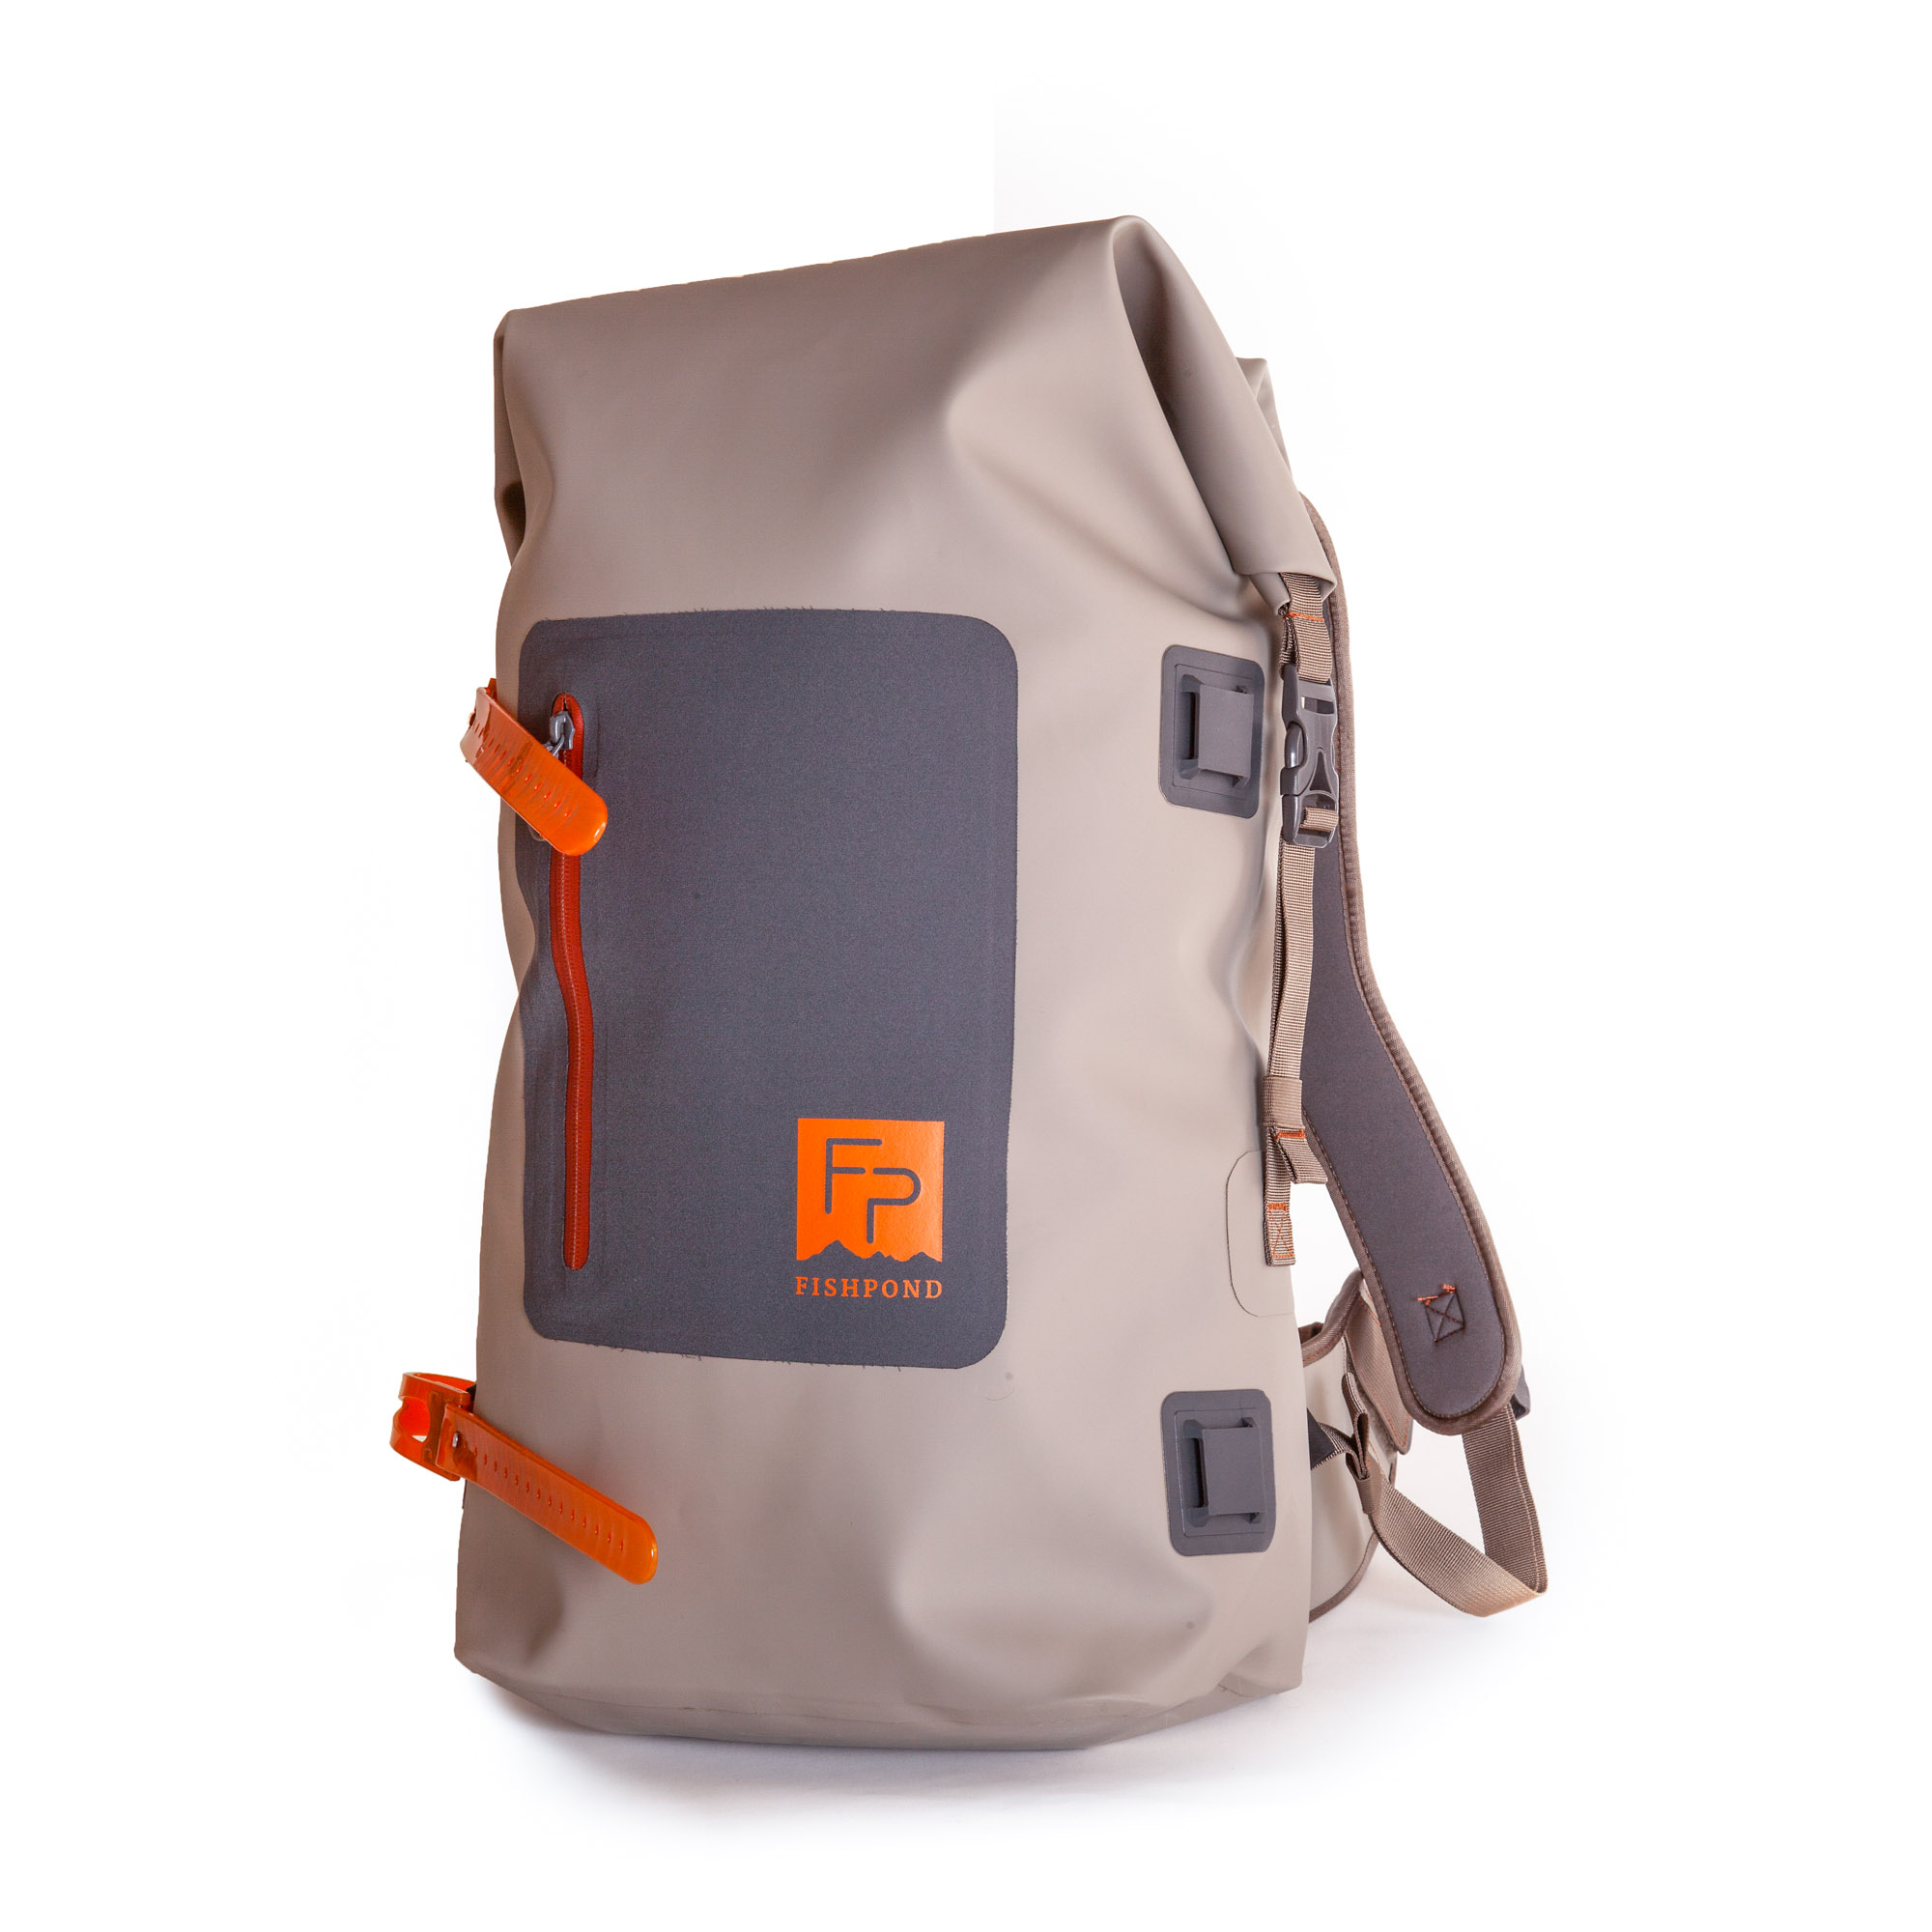 Fishpond Wind River Roll-Top Backpack – Guide Flyfishing, Fly Fishing Rods,  Reels, Sage, Redington, RIO